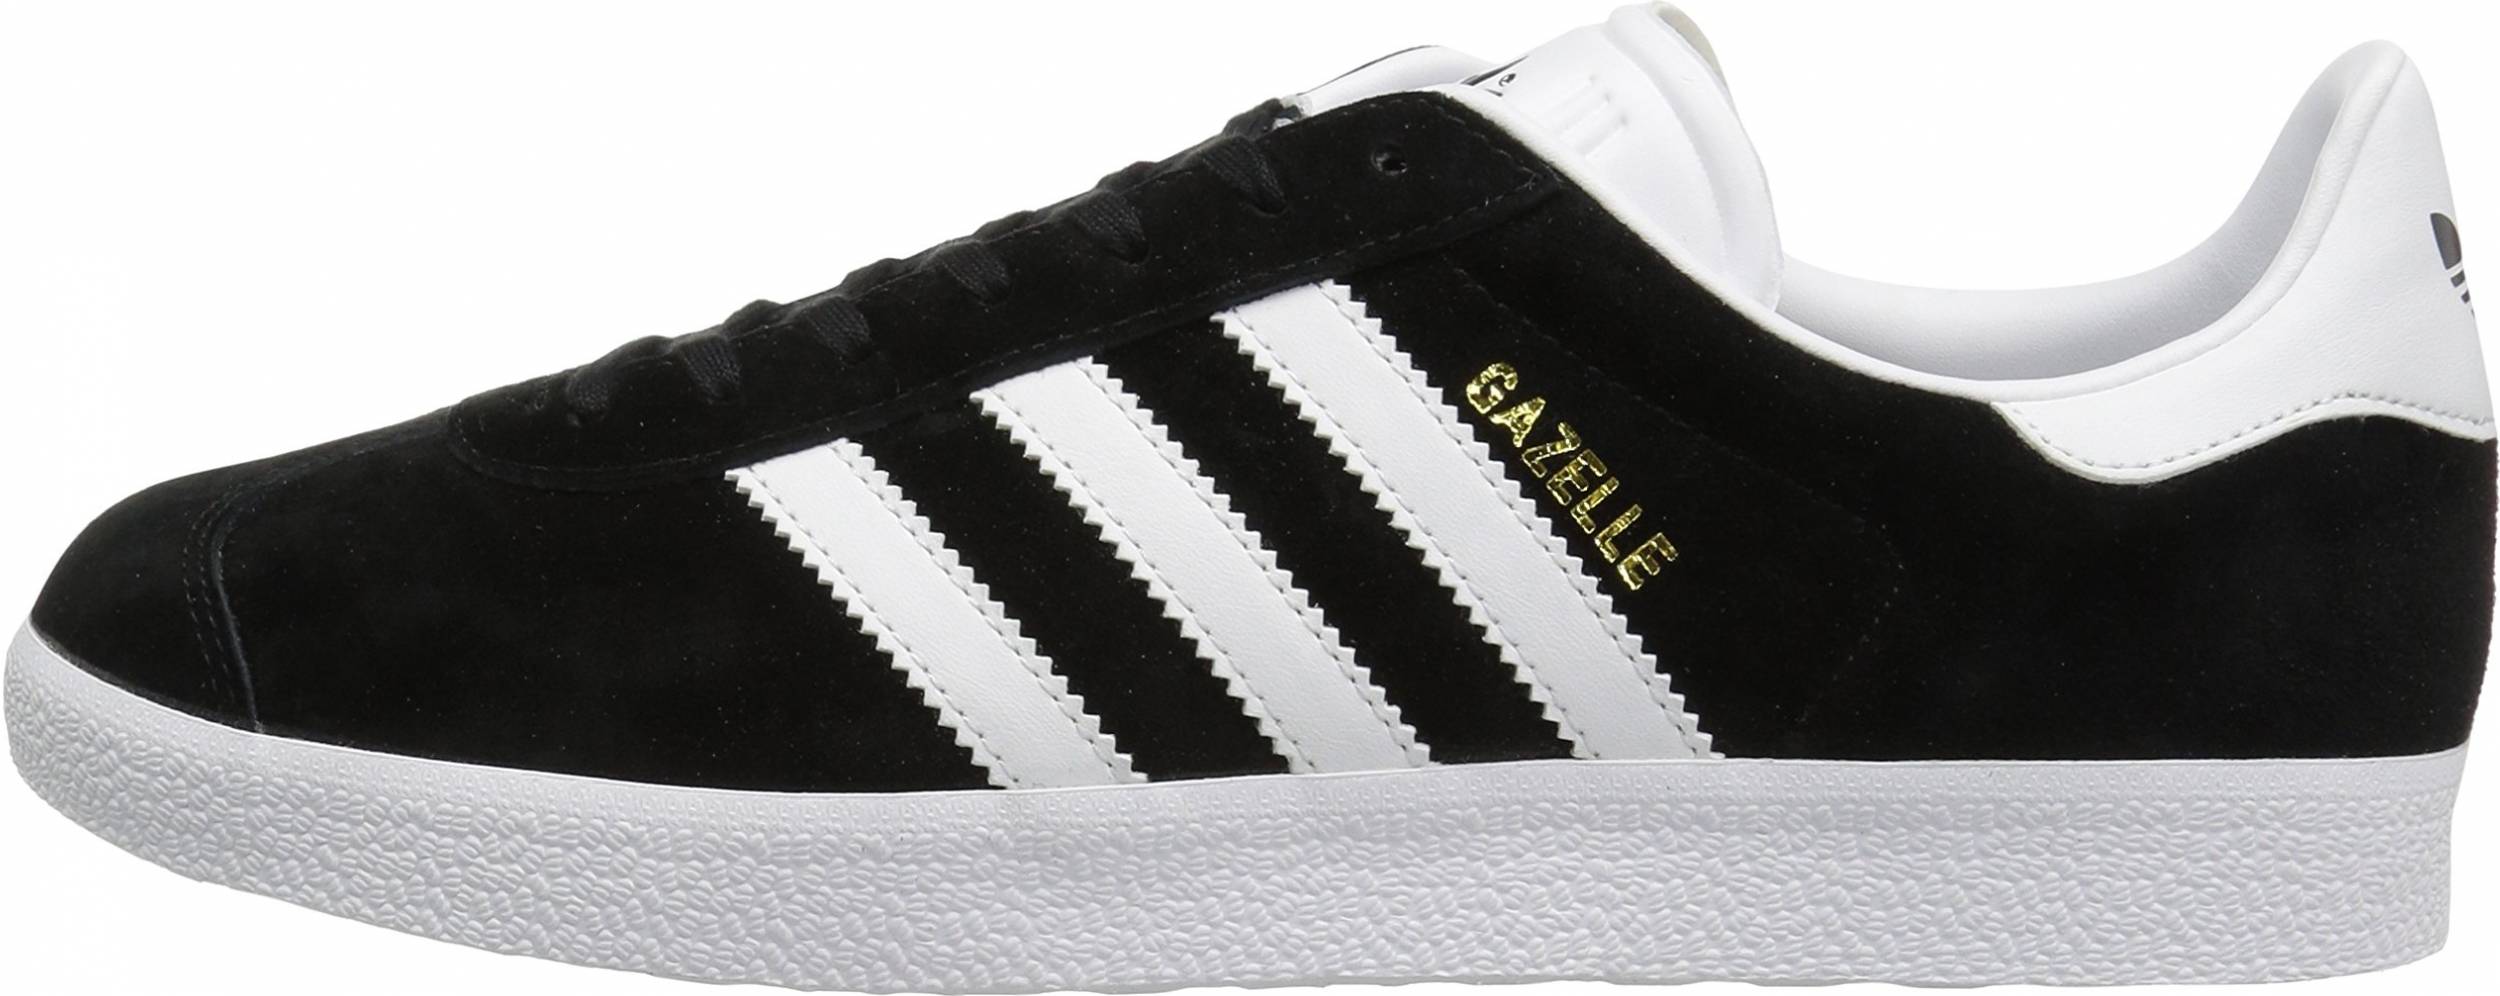 Adidas Gazelle sneakers in 20 colors (only $51) | RunRepeat